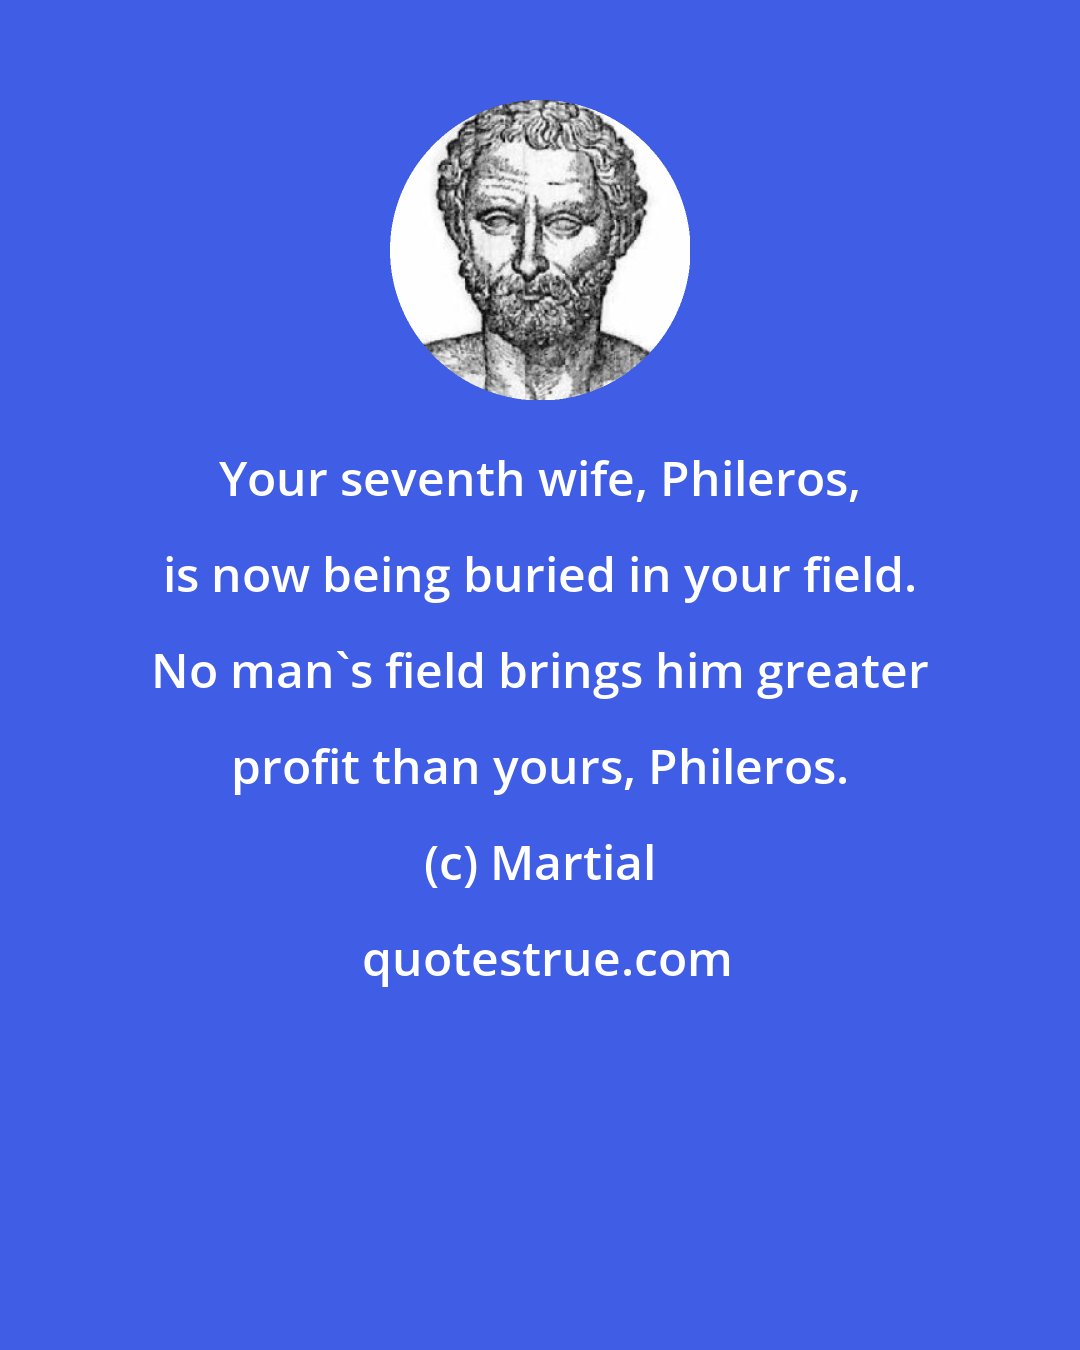 Martial: Your seventh wife, Phileros, is now being buried in your field. No man's field brings him greater profit than yours, Phileros.